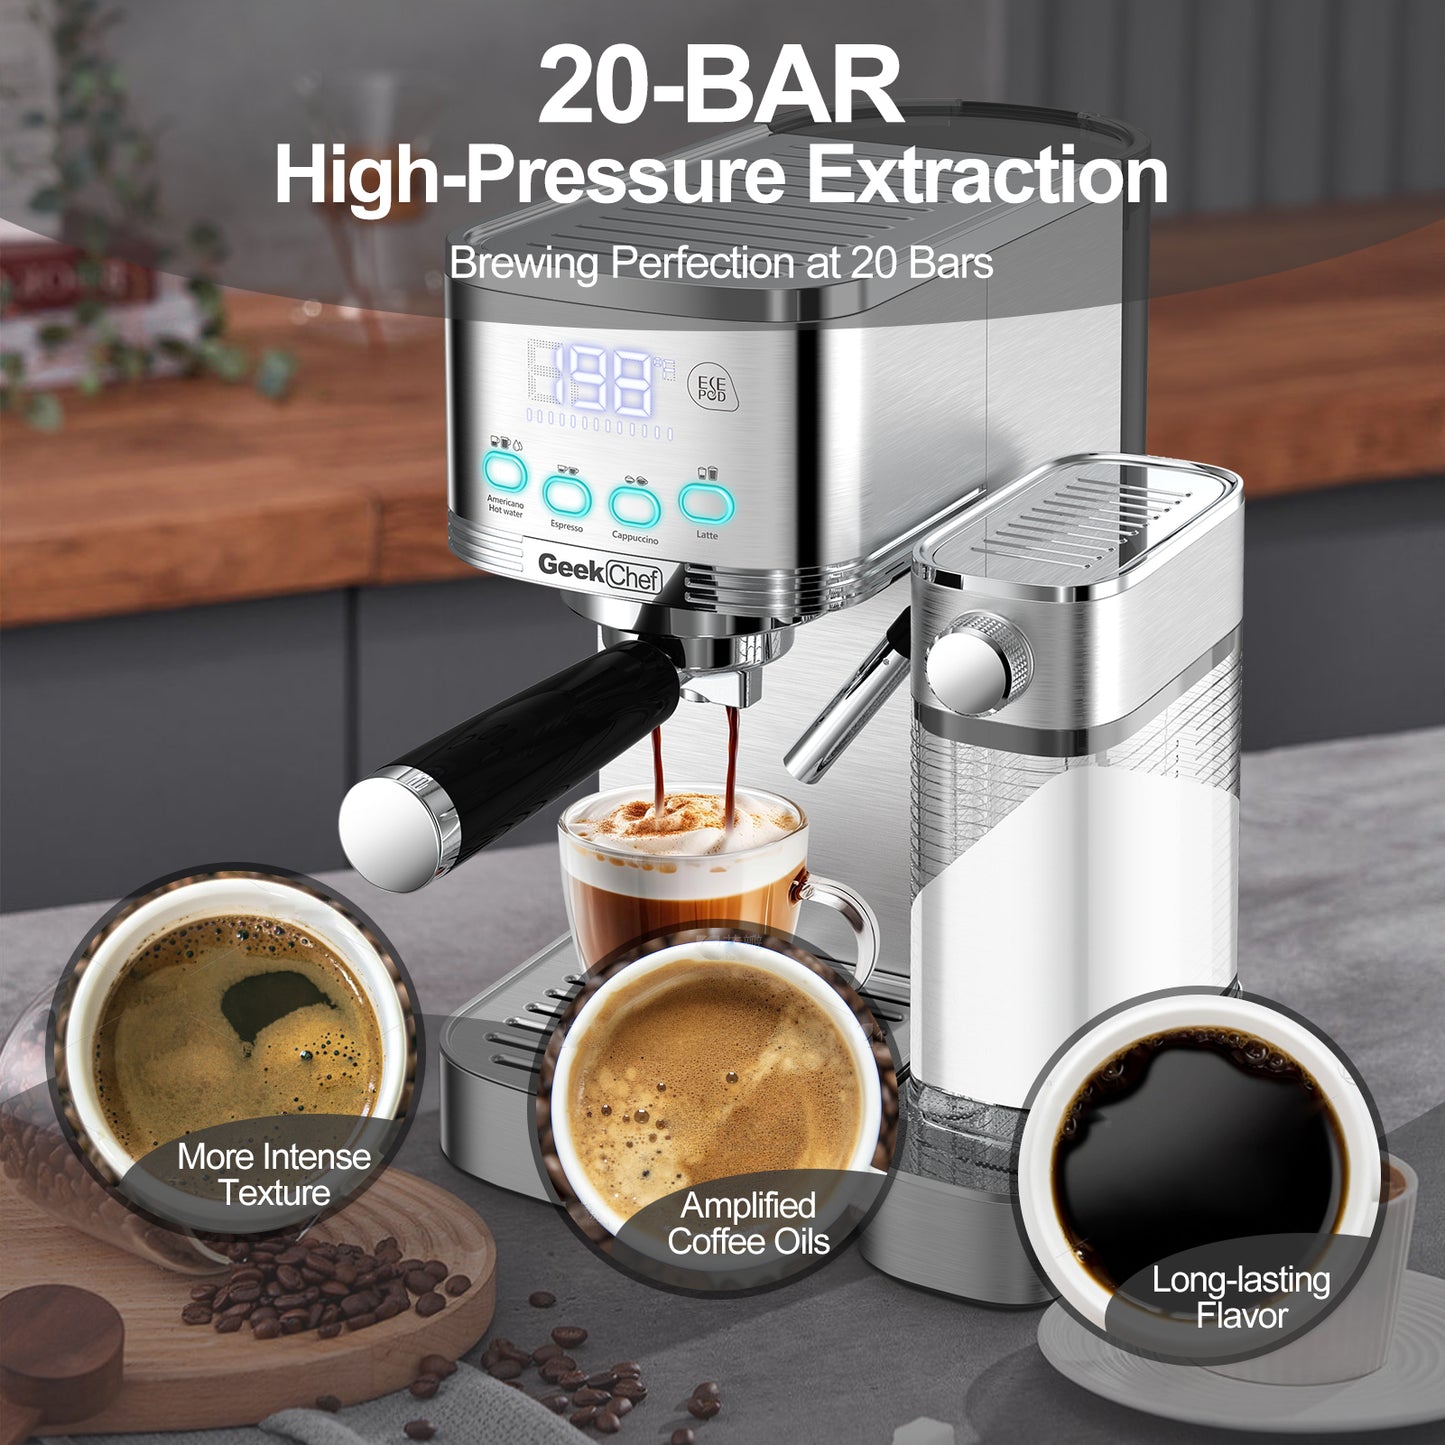 Geek Chef Espresso and Cappuccino Machine with Automatic Milk Frother,20Bar Espresso Maker for Home, for Cappuccino or Latte,with ESE POD filter, Stainless Steel, Gift for Coffee Lover